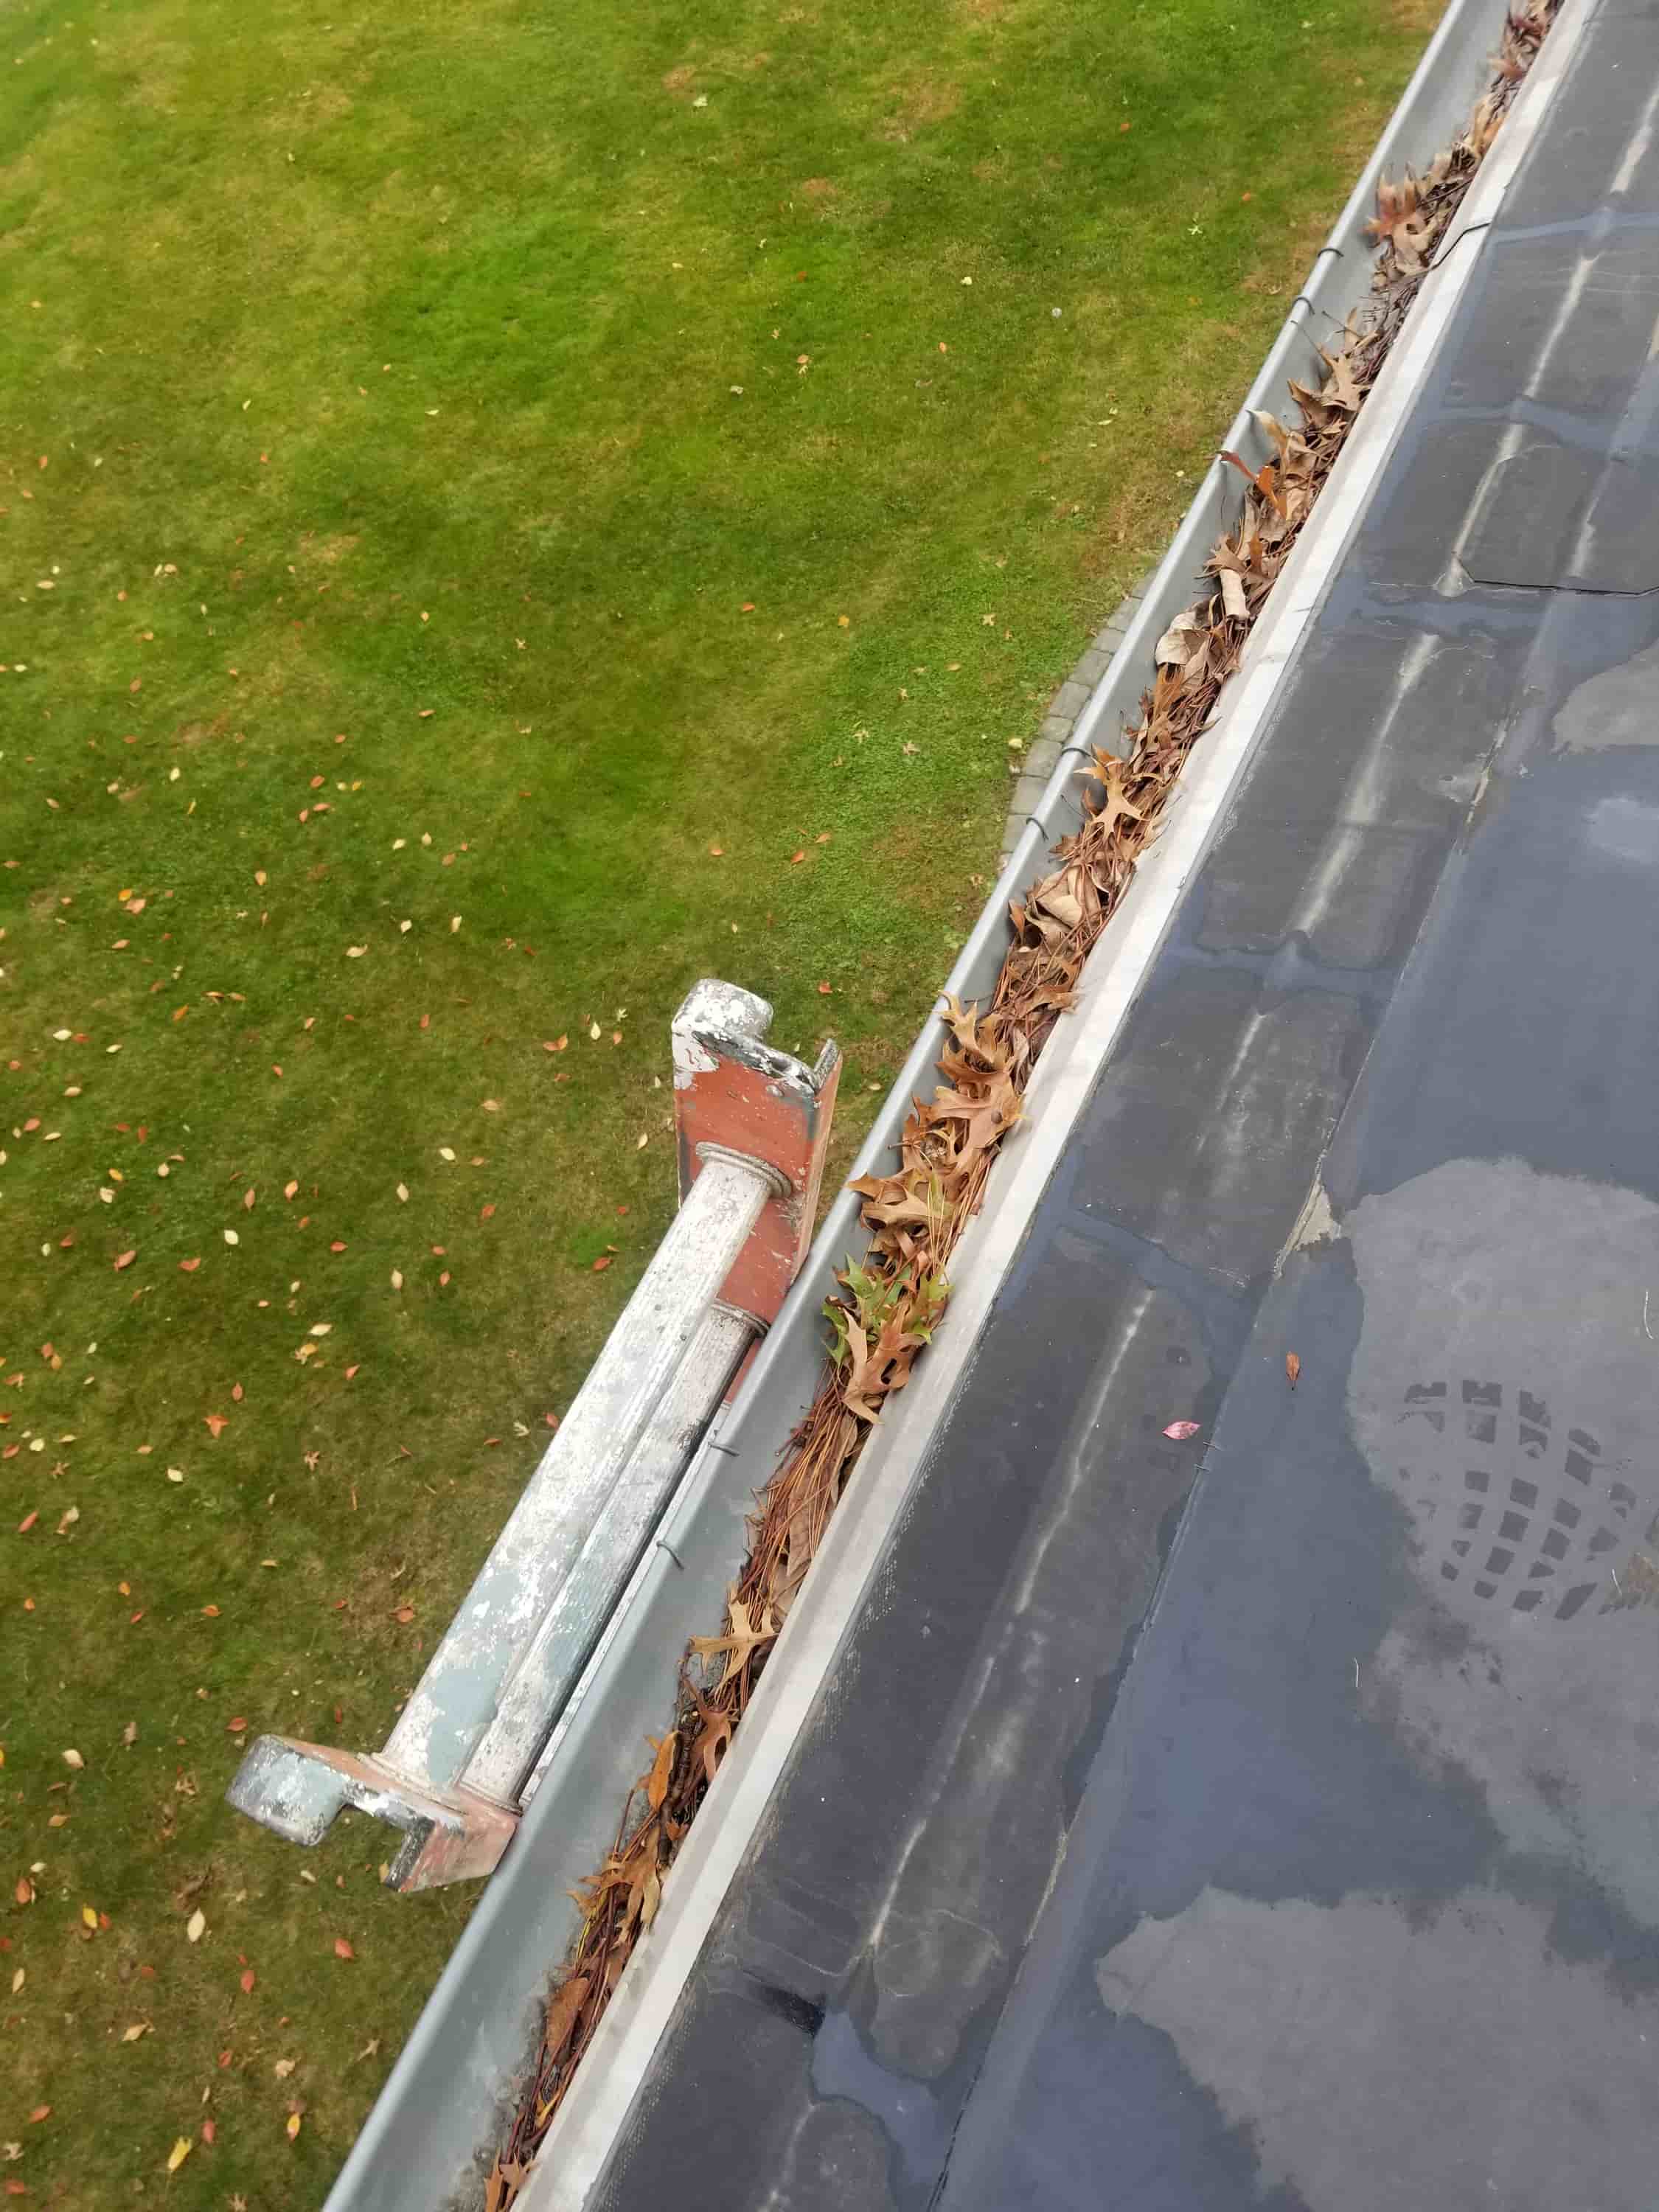 gutter cleaning hourly rate